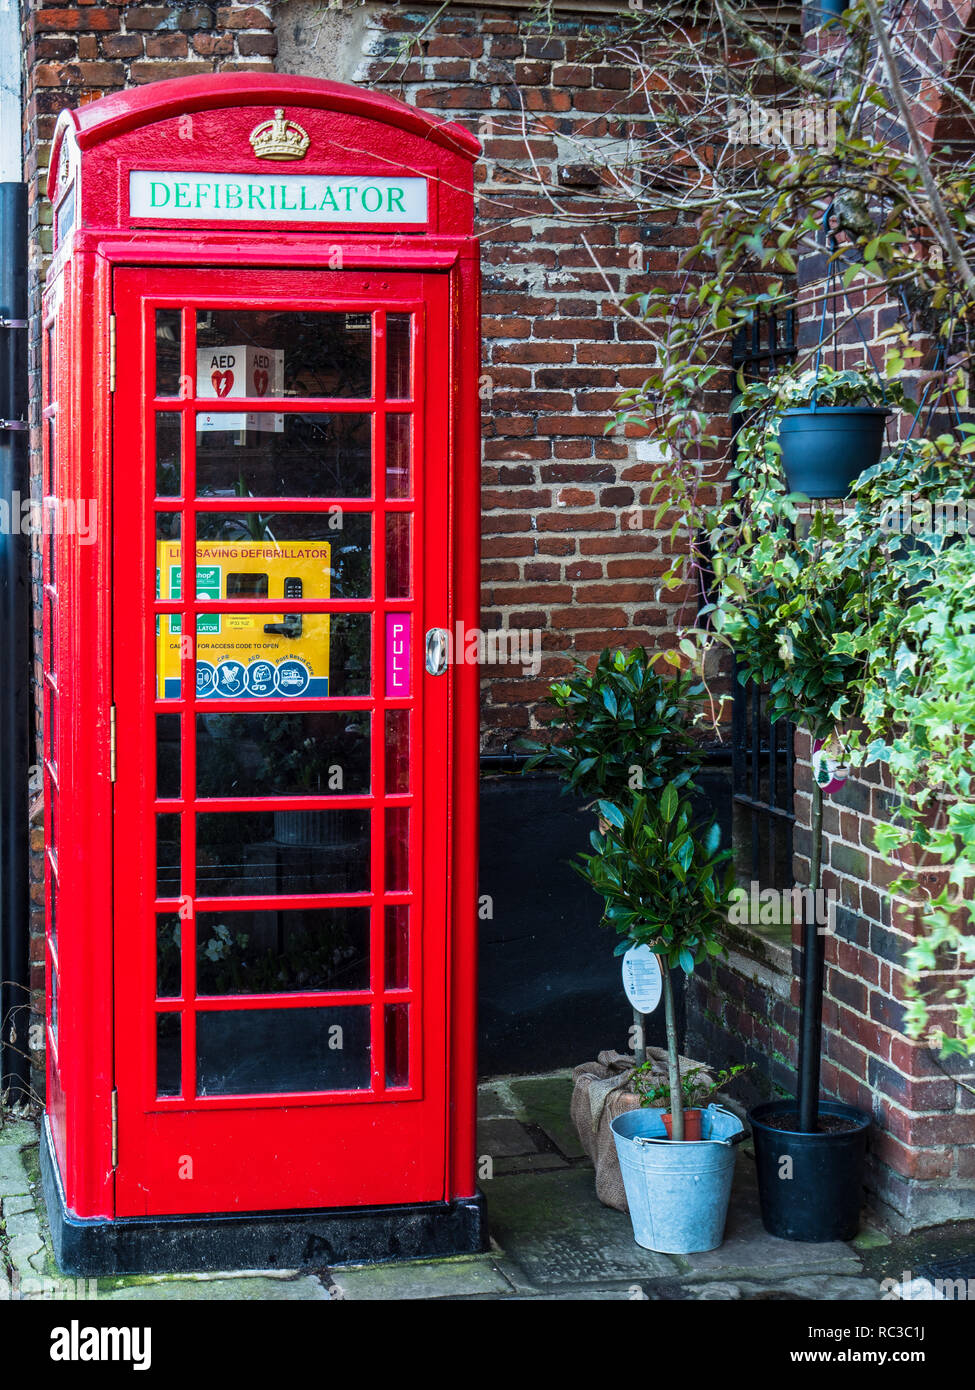 Phone Box defibrillator - Many British Red Telephone boxes have been converted into defibrillator locations. Red Phone Box reuse. Stock Photo